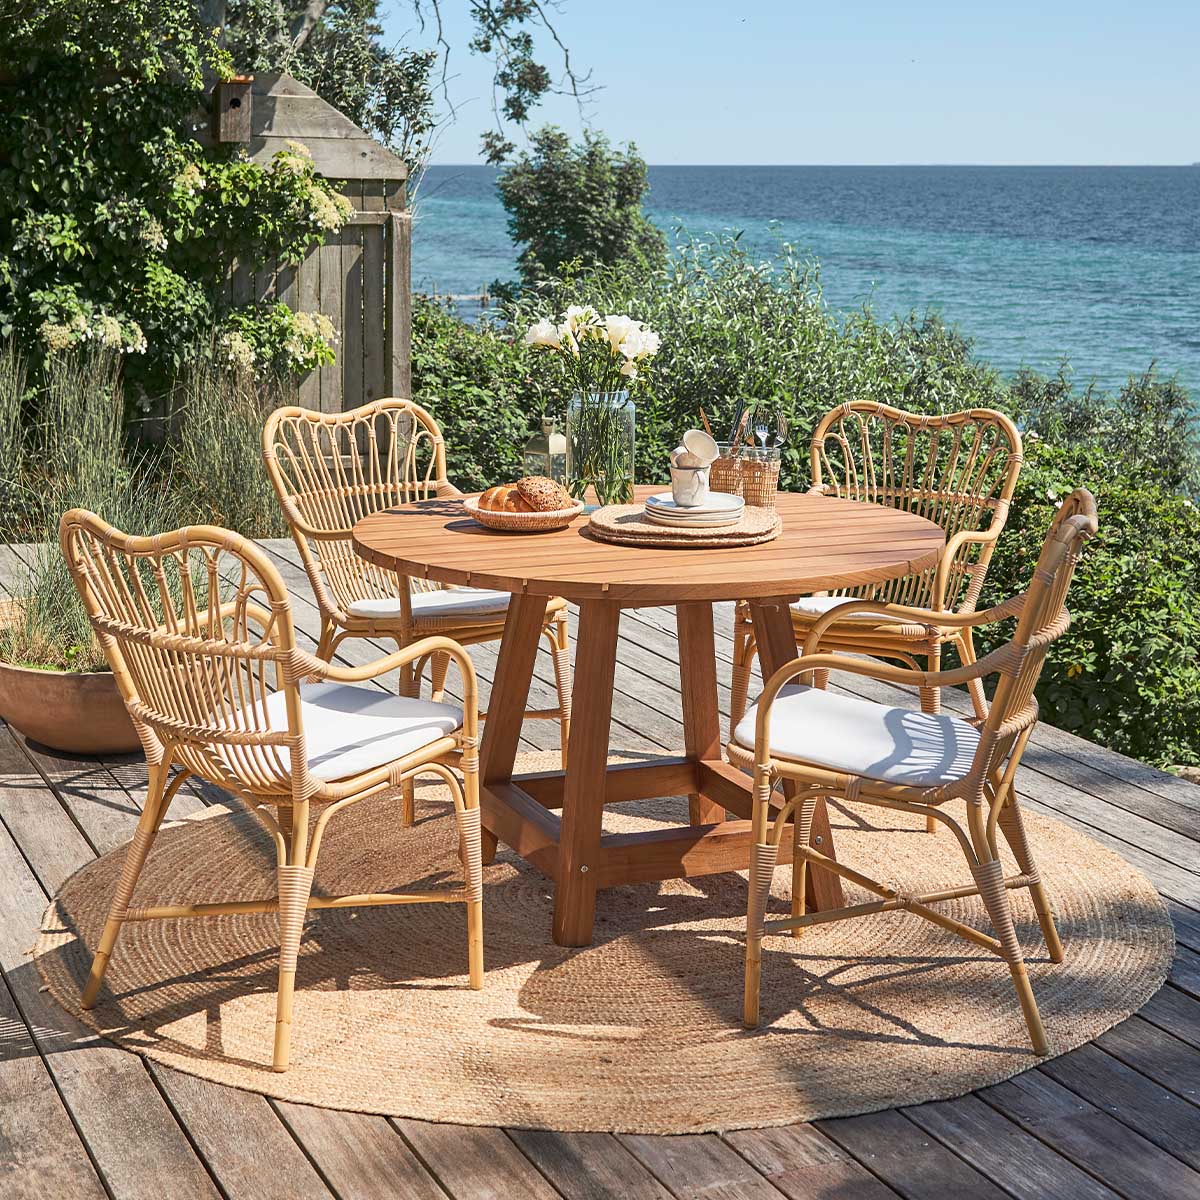 Seat cushion | Margret Exterior Dining Chair